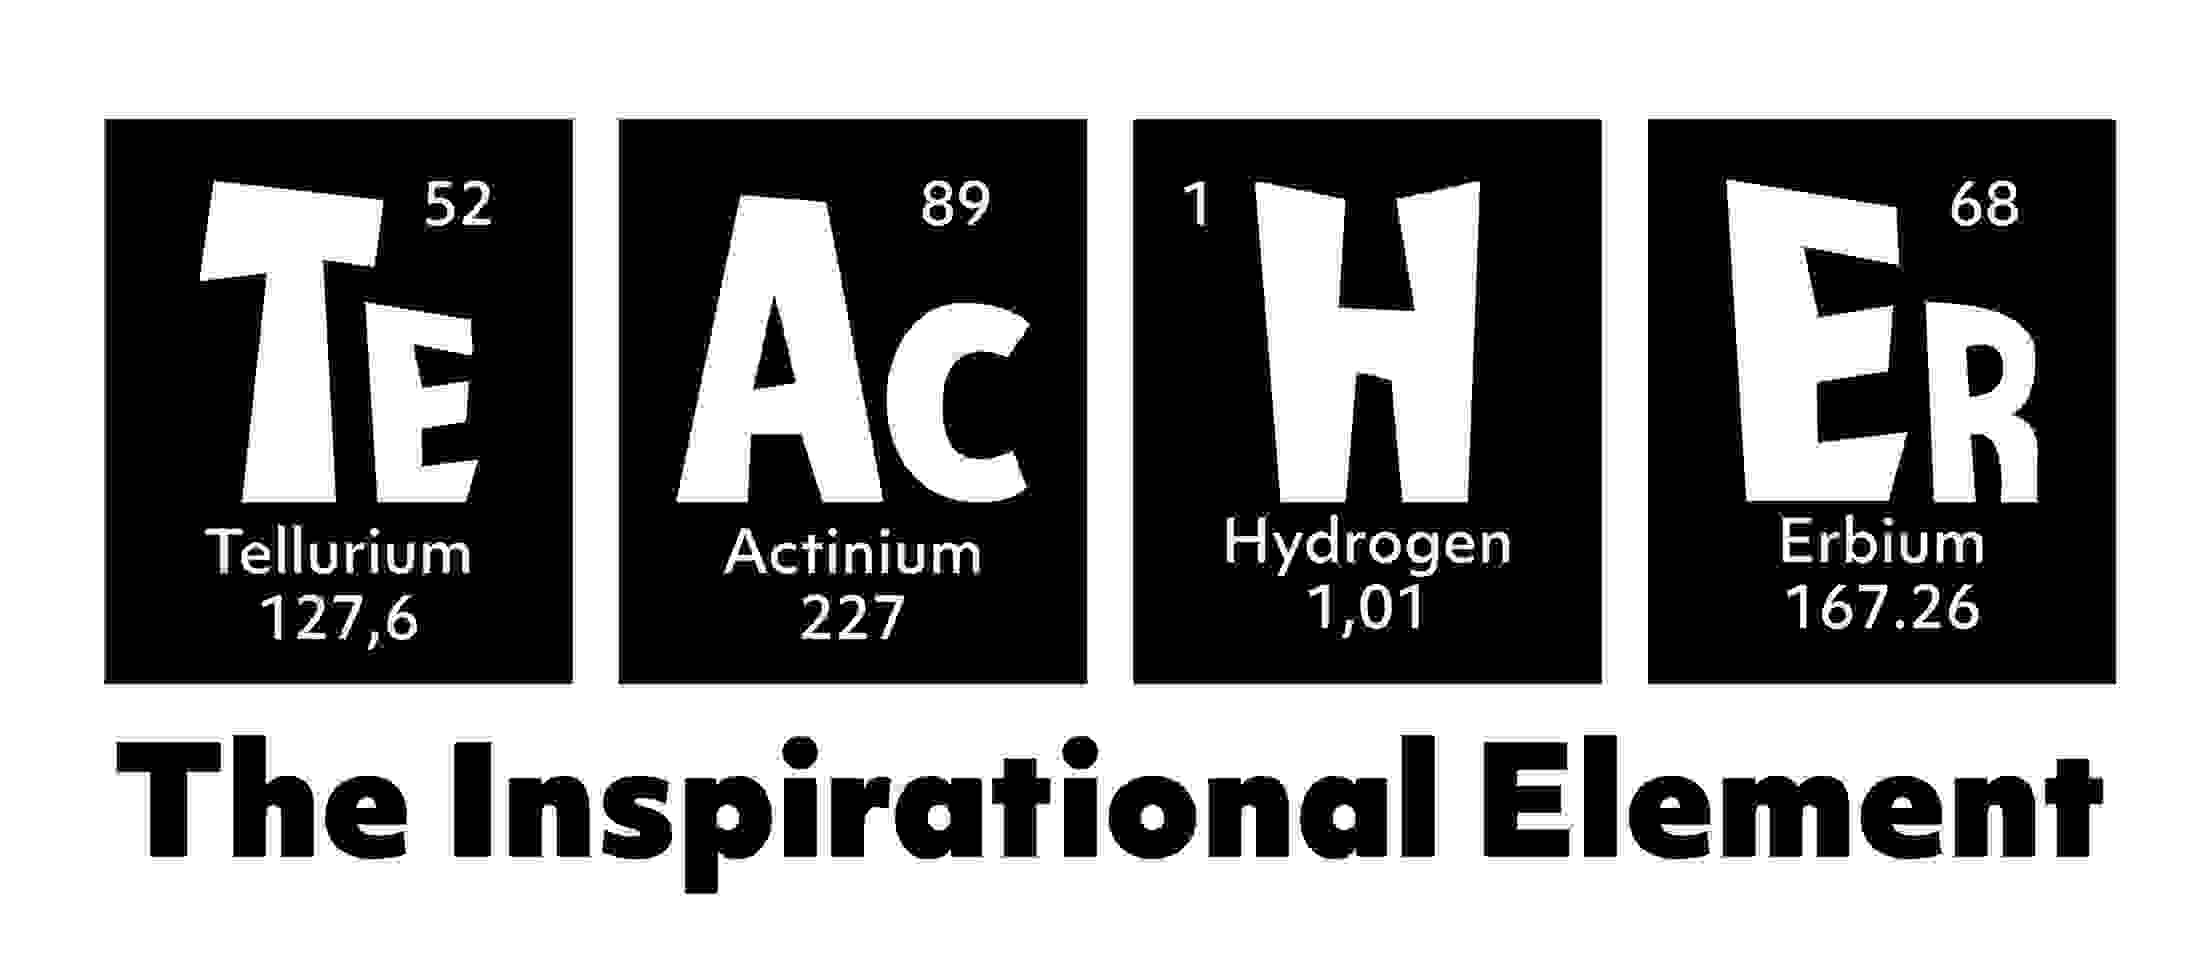 the letters that spell teacher, broken into four elements on the periodic table and a subhed that reads the inspirational element